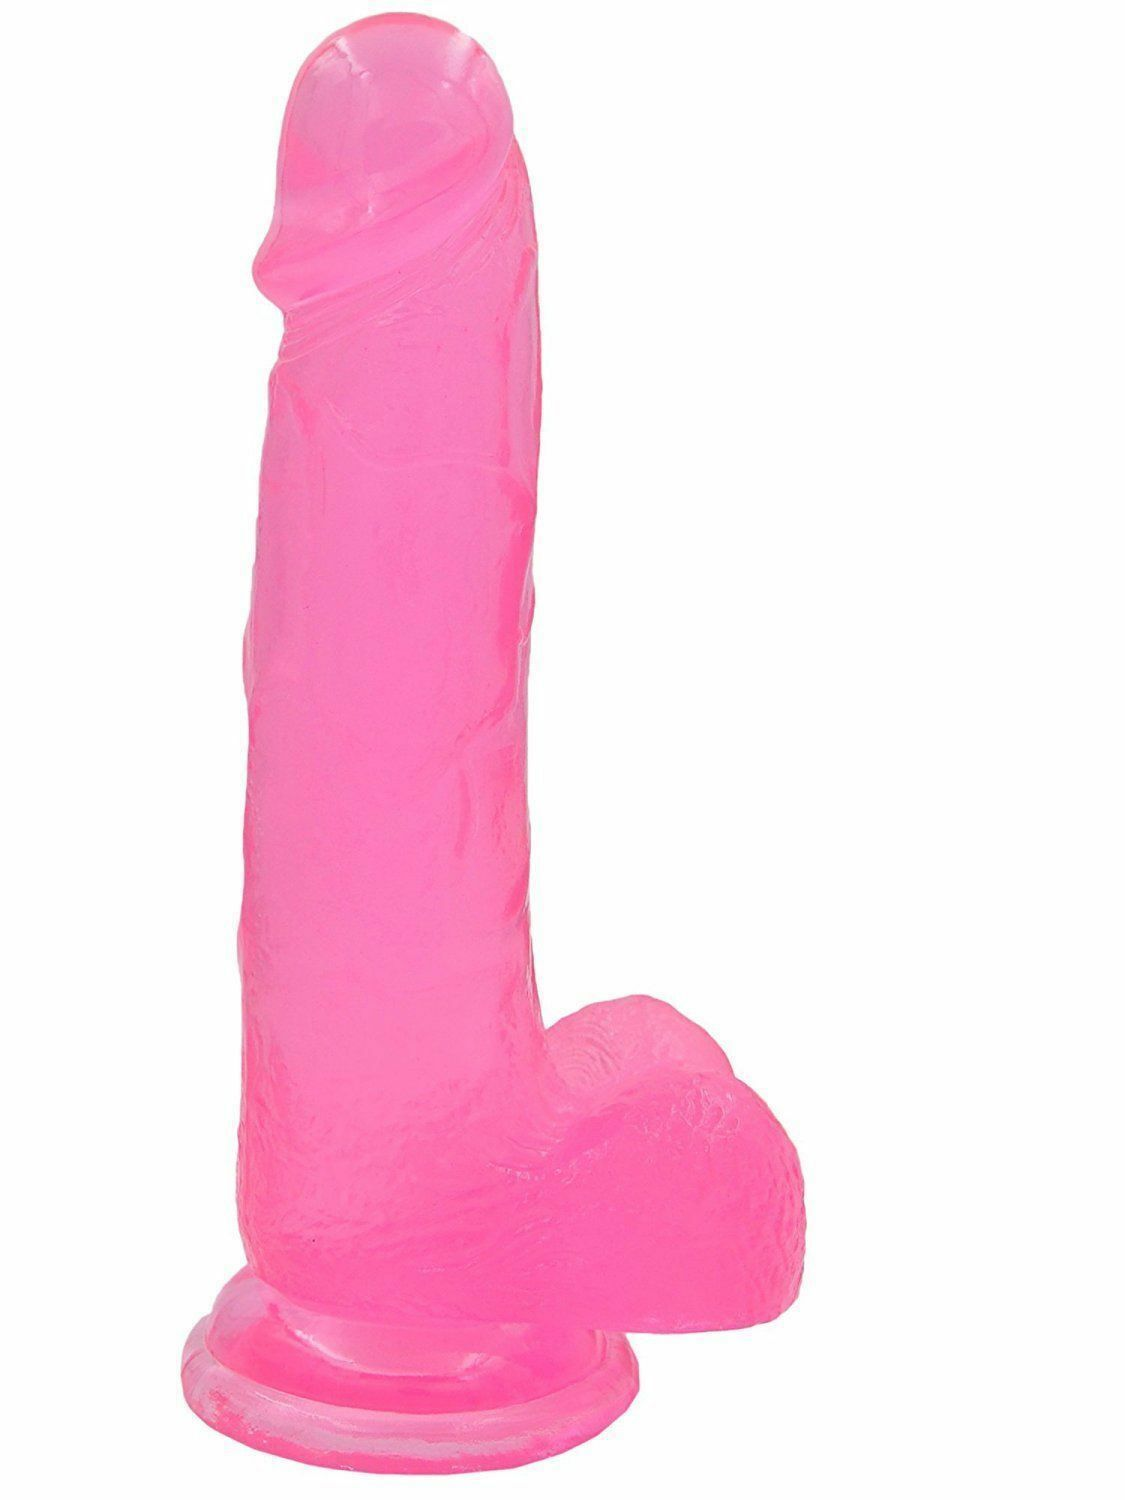 Monstermarketing African BBC 8 Inch Realistic Dildo Sex Toys For Women Sex Toys For Girls Pink Lazada PH